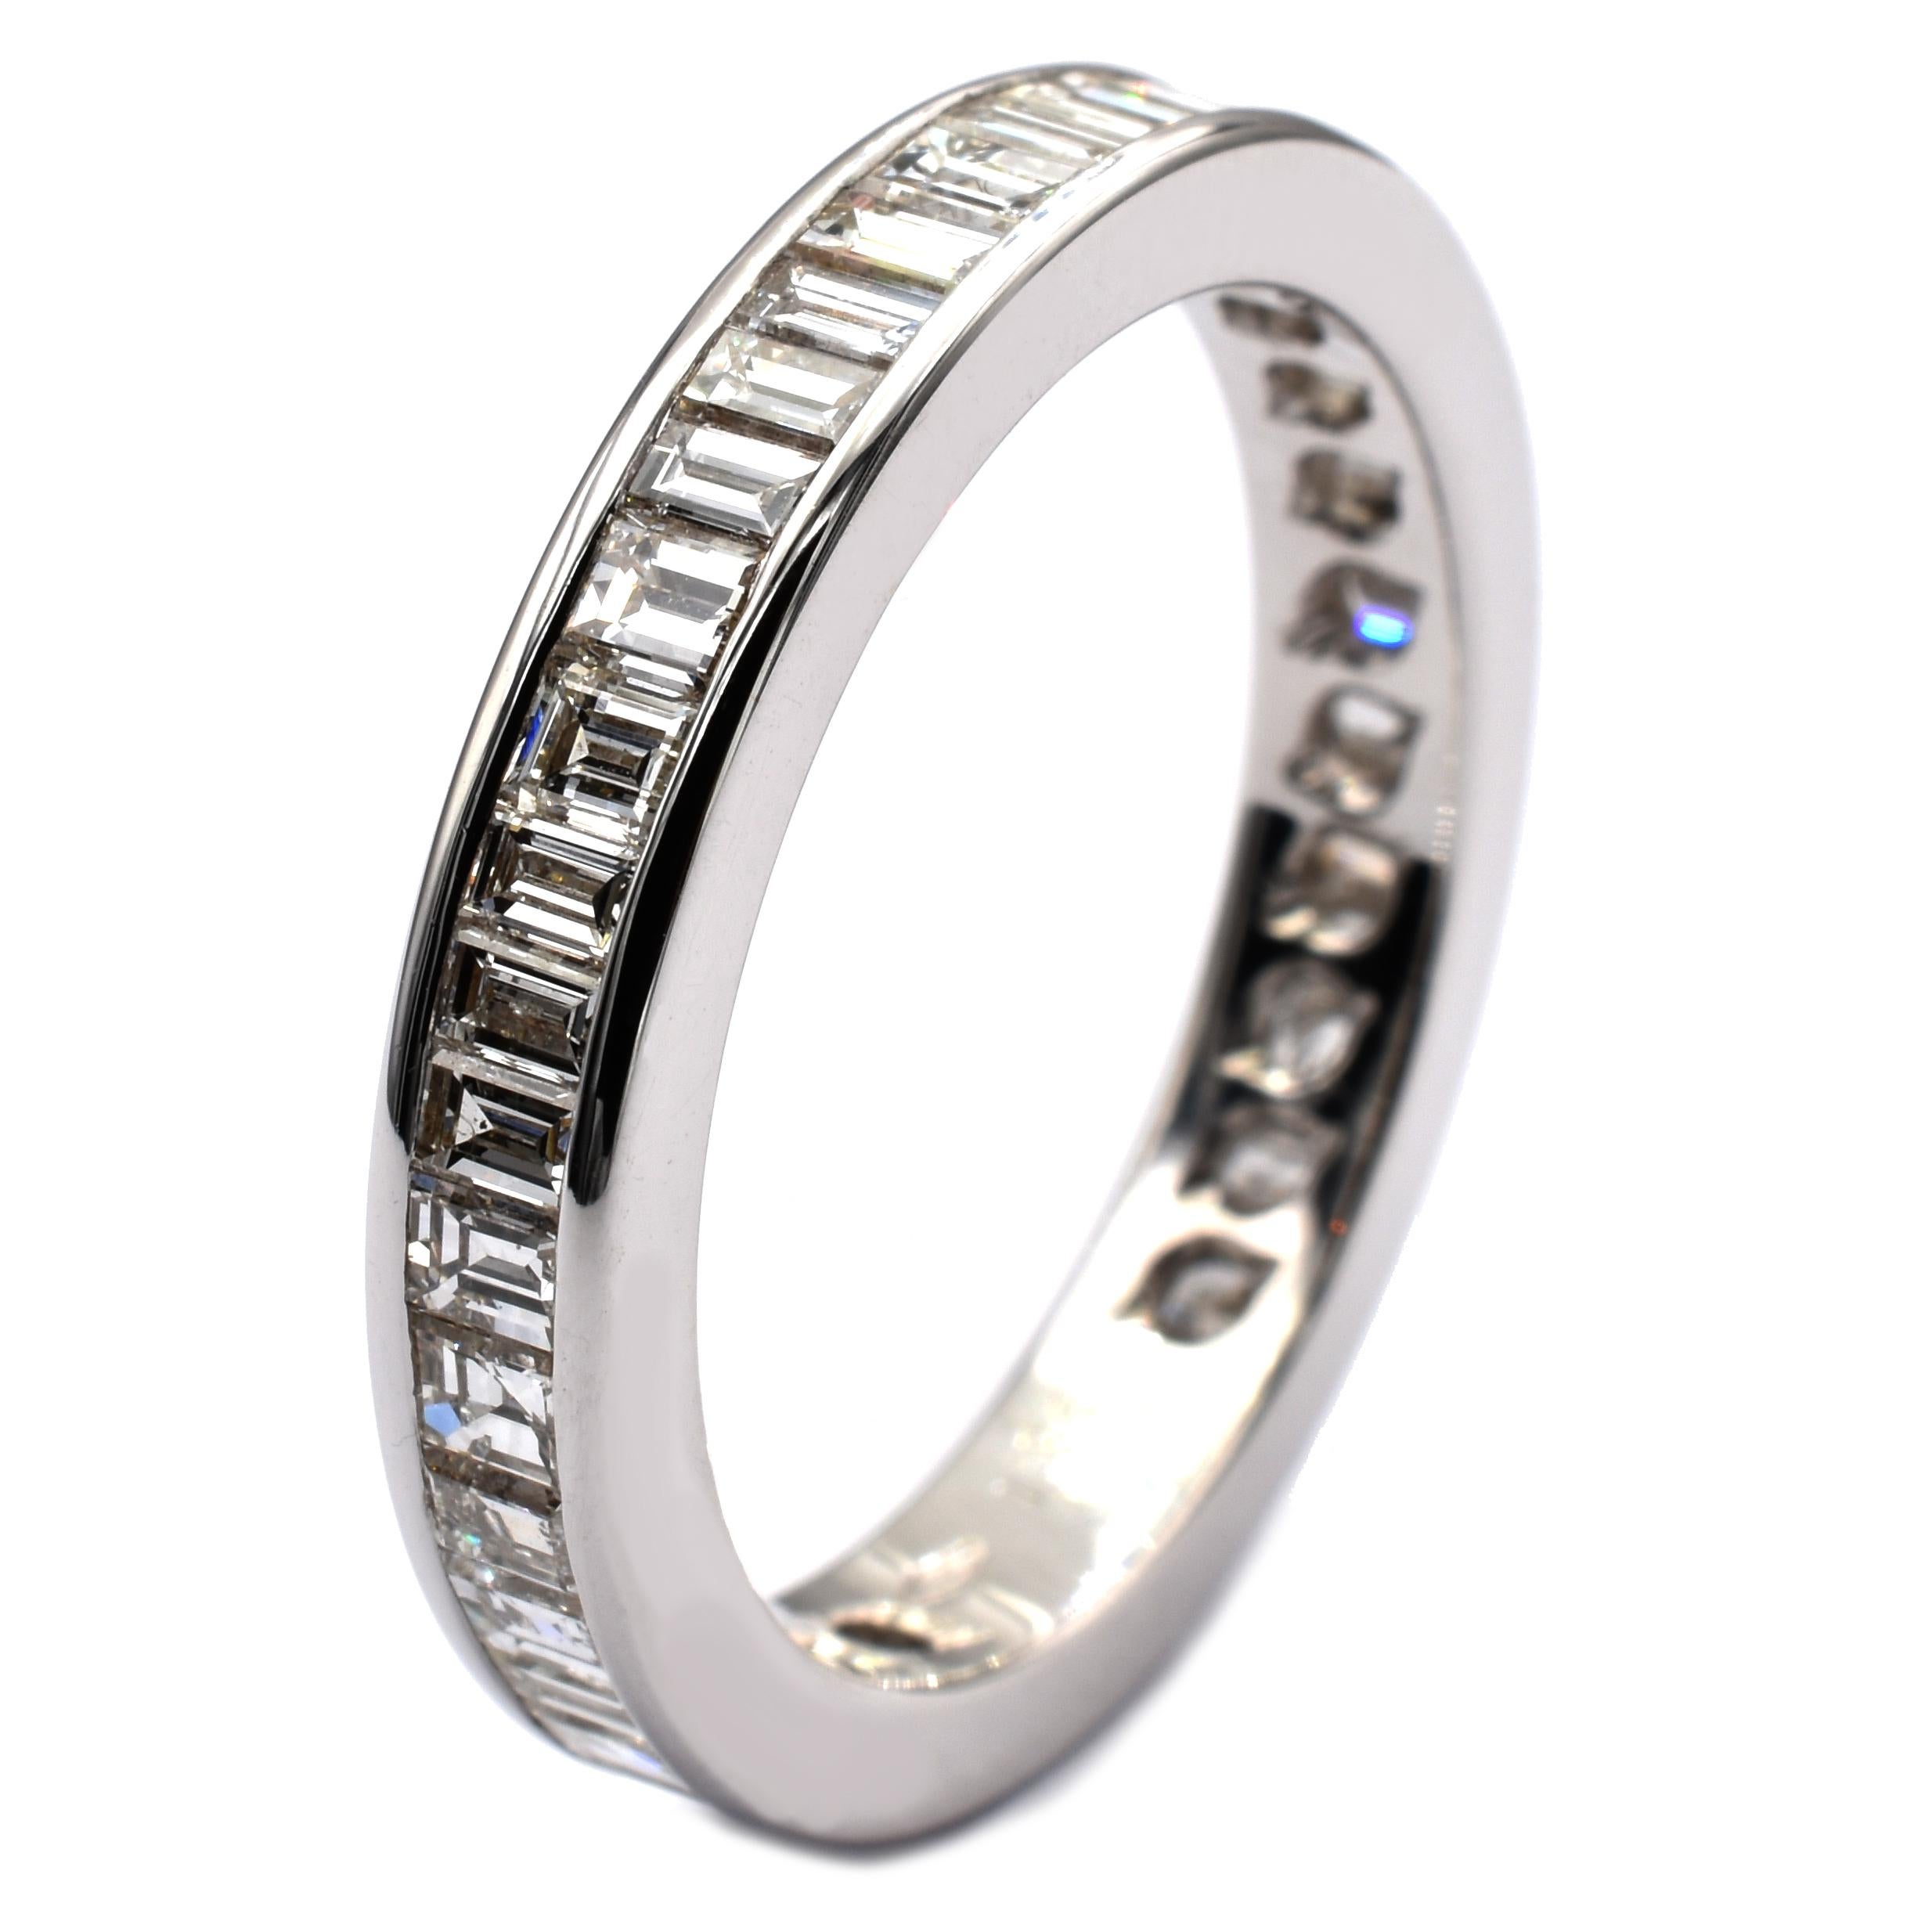 Baguette Cut Gilberto Cassola Baguette Diamonds White Gold Eternity Ring Made in Italy For Sale